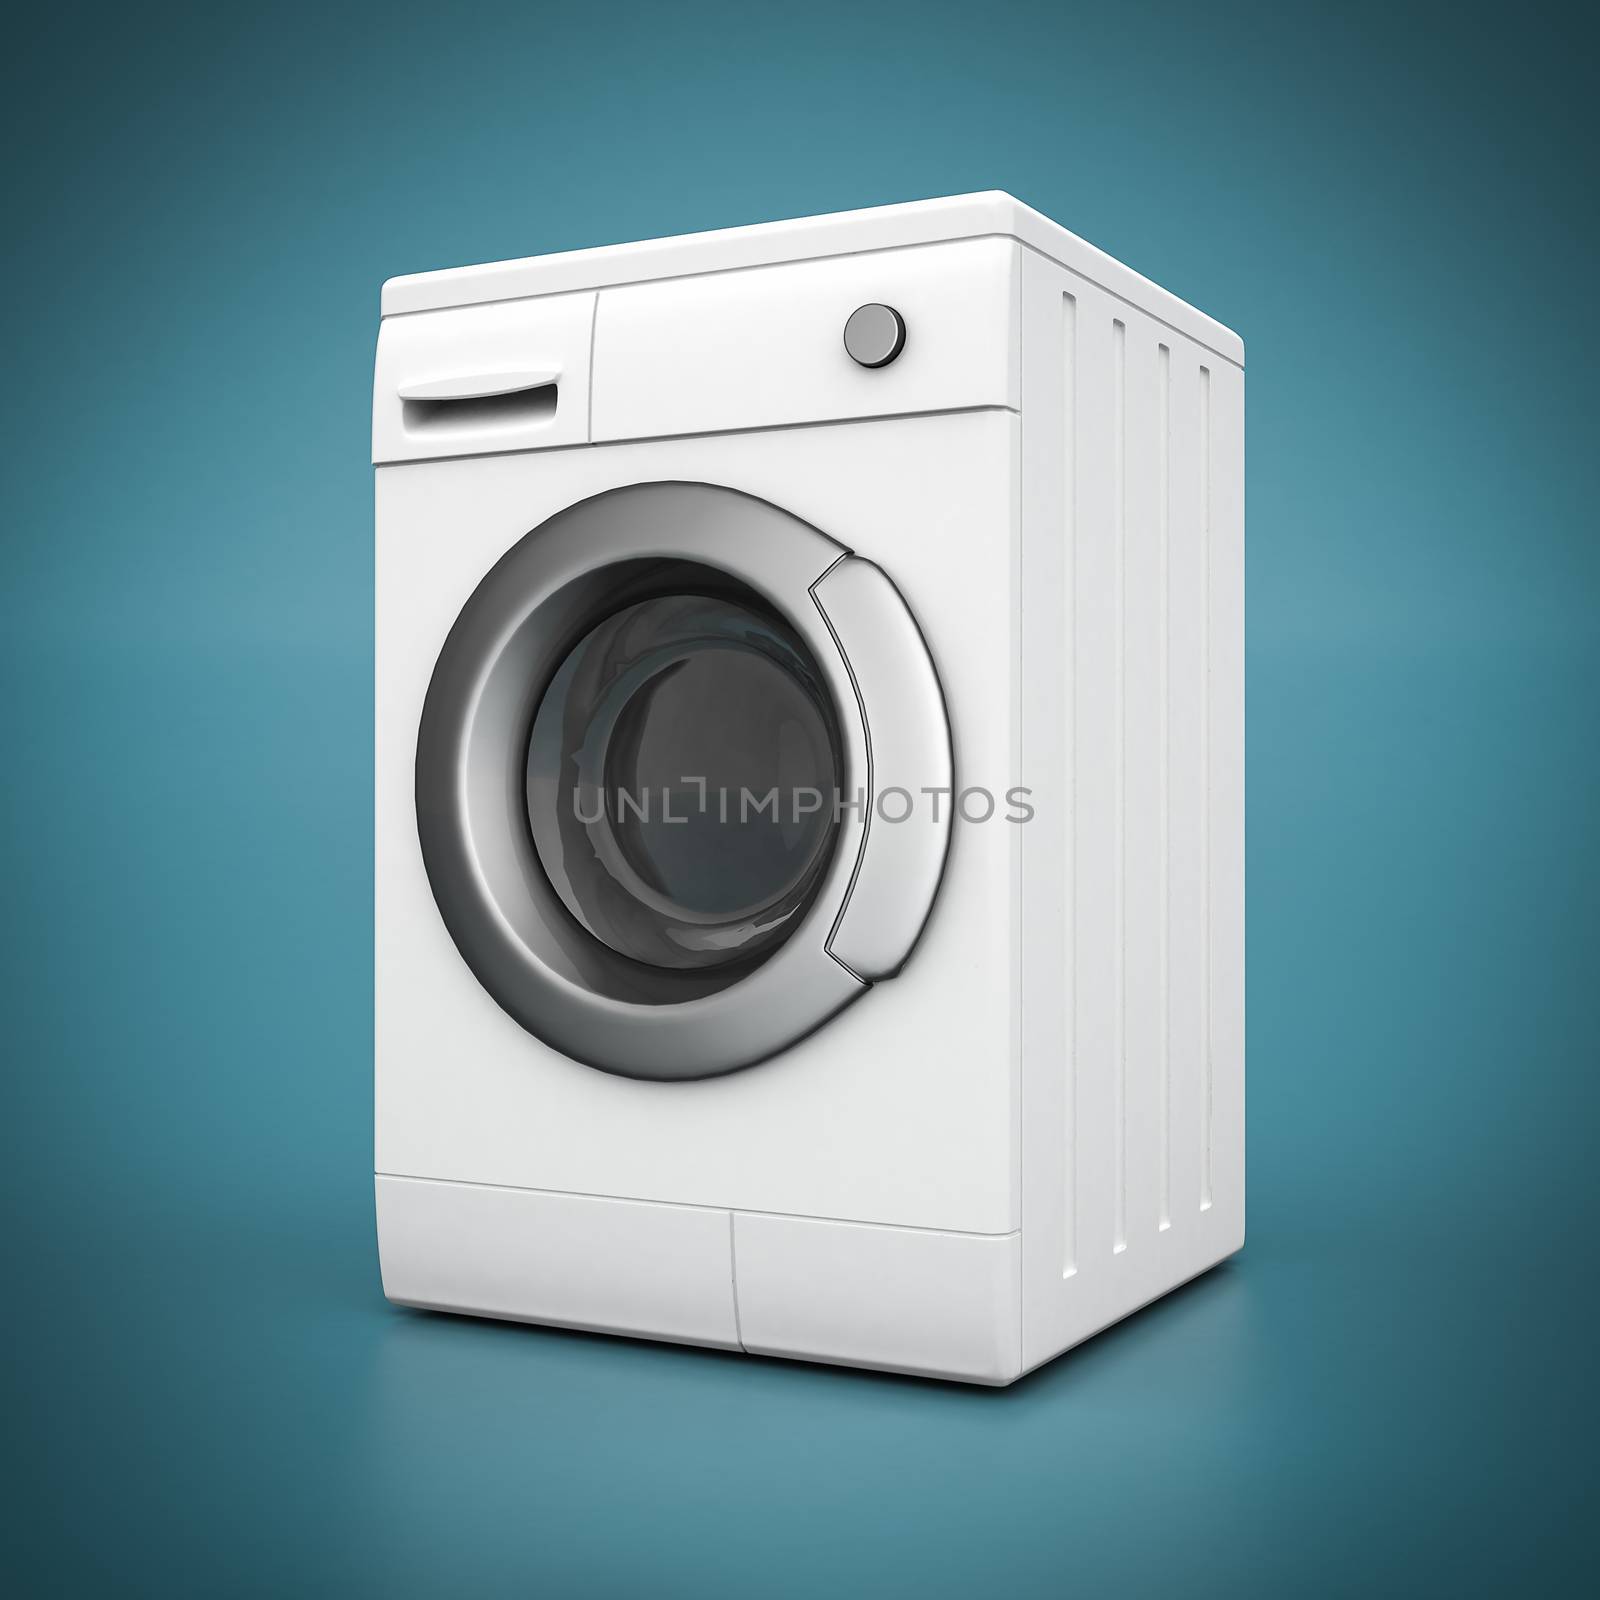 picture of washing machine on a blue background